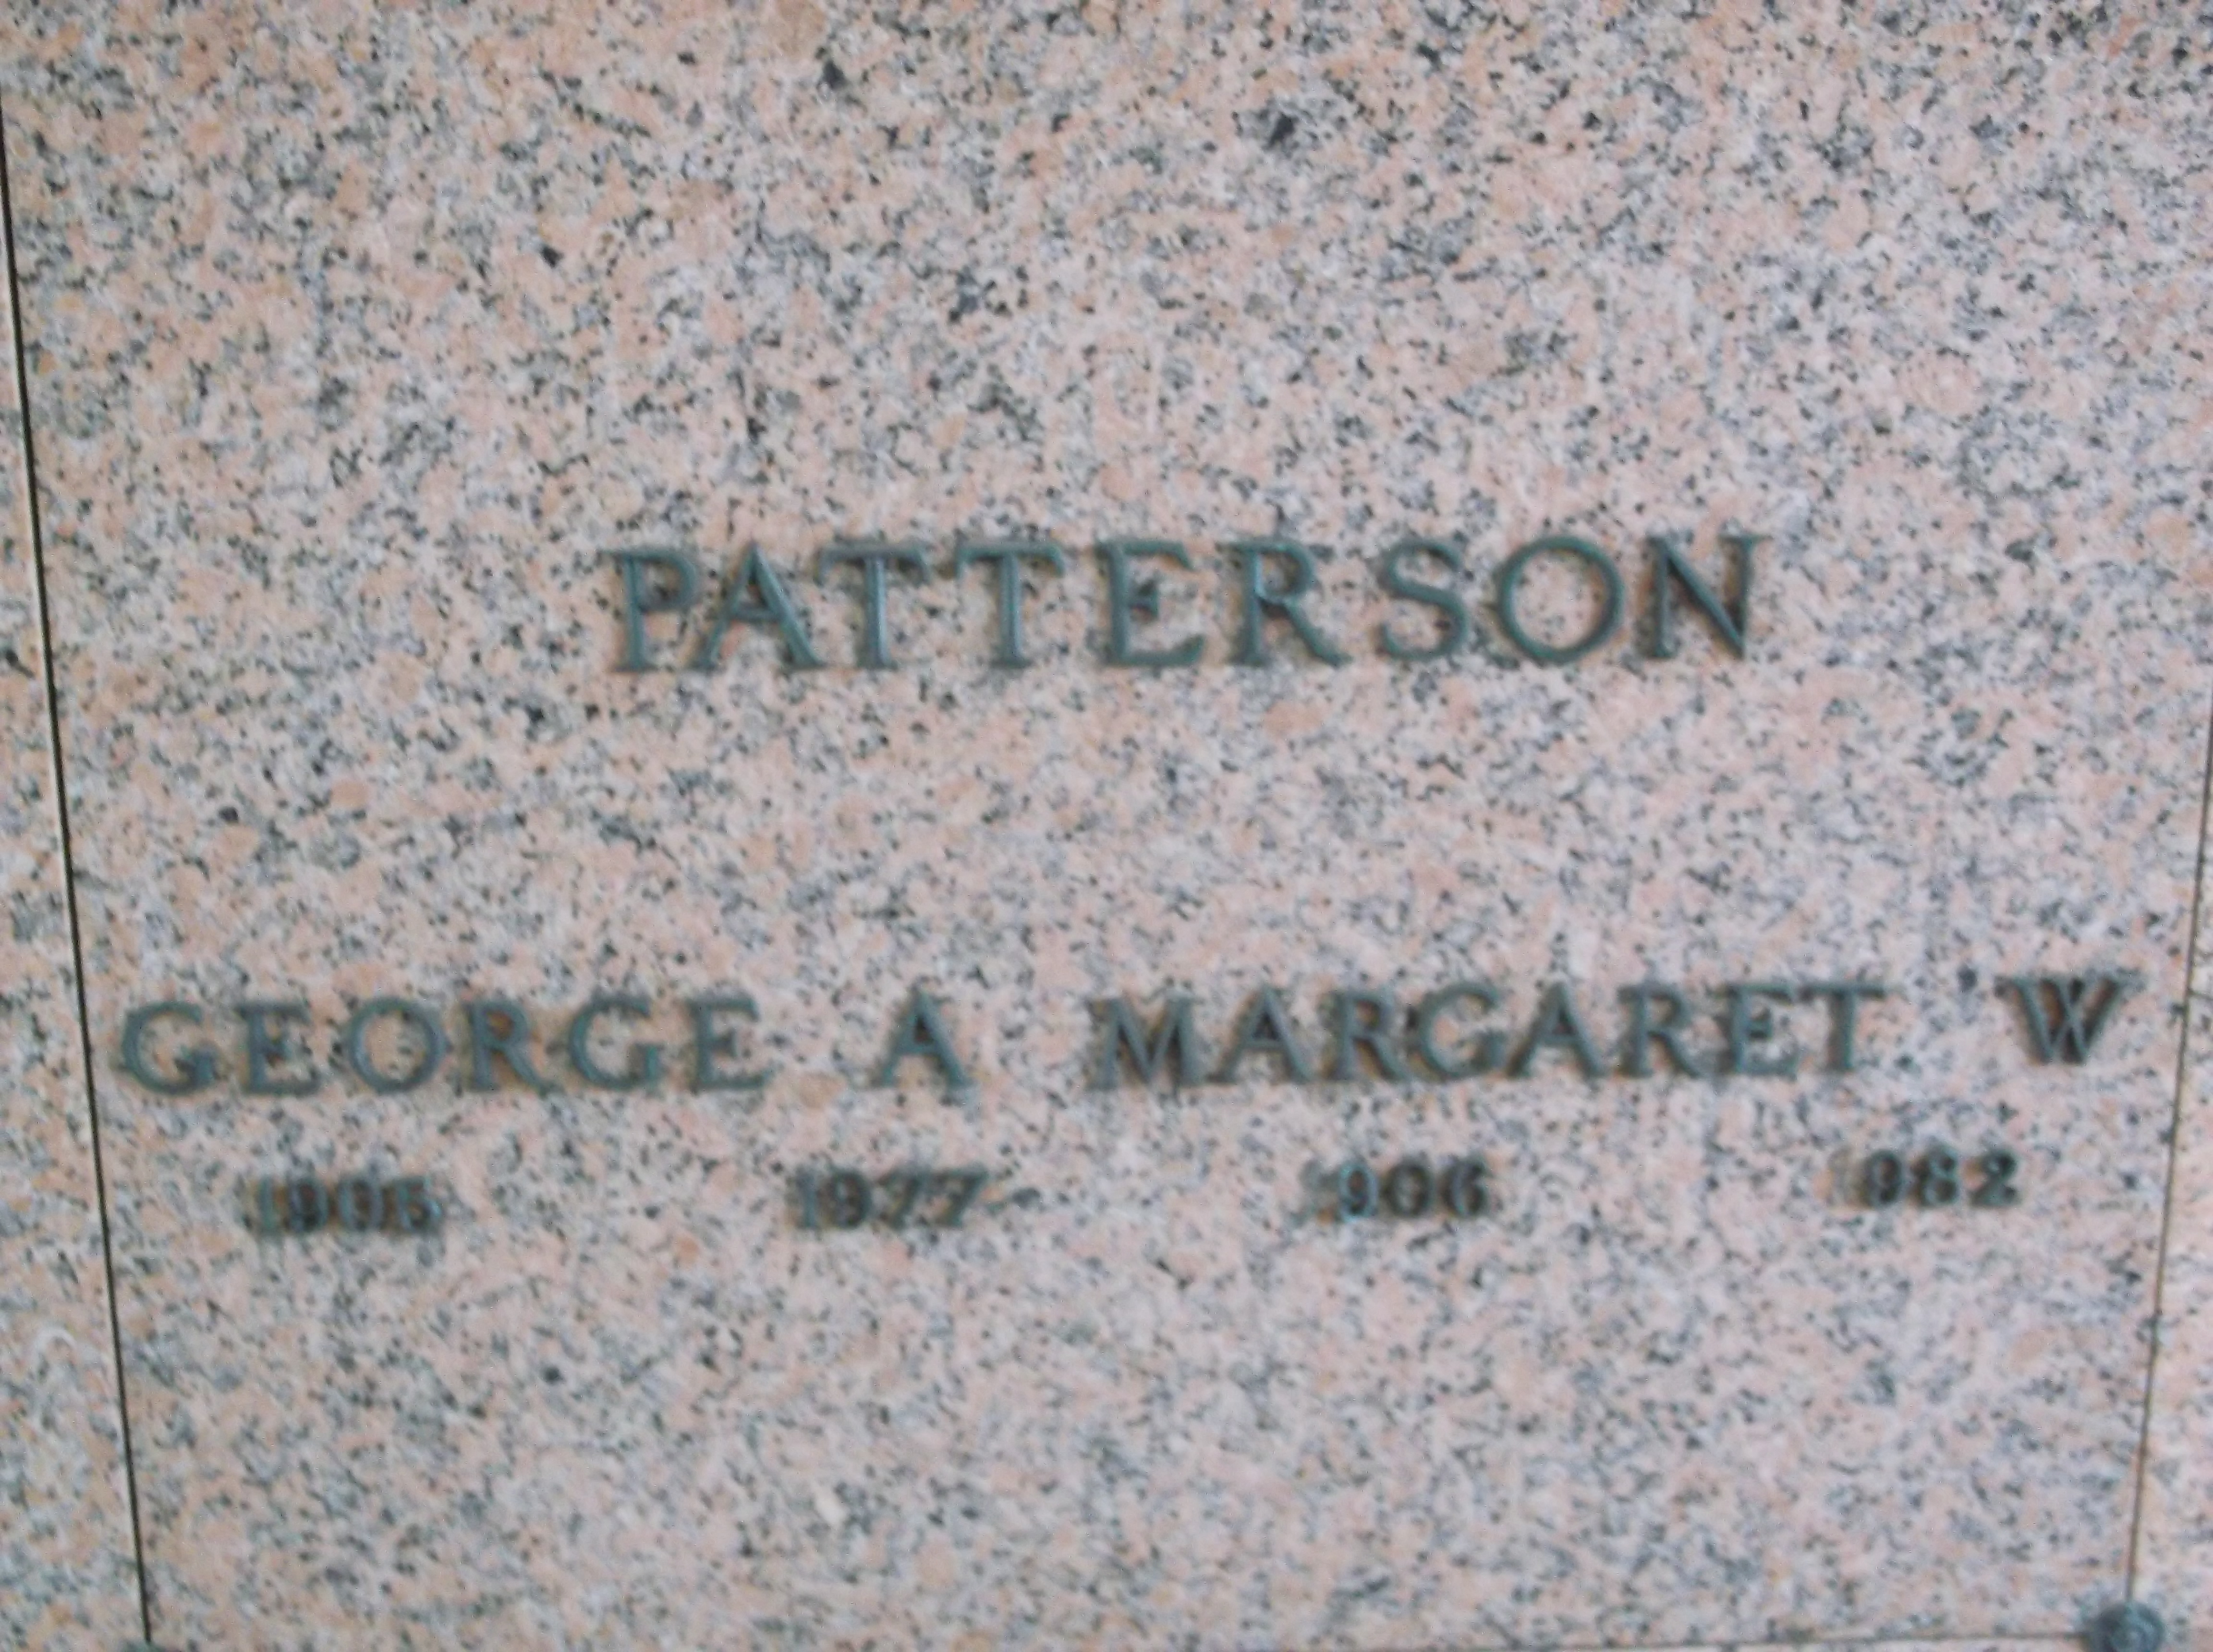 George A Patterson